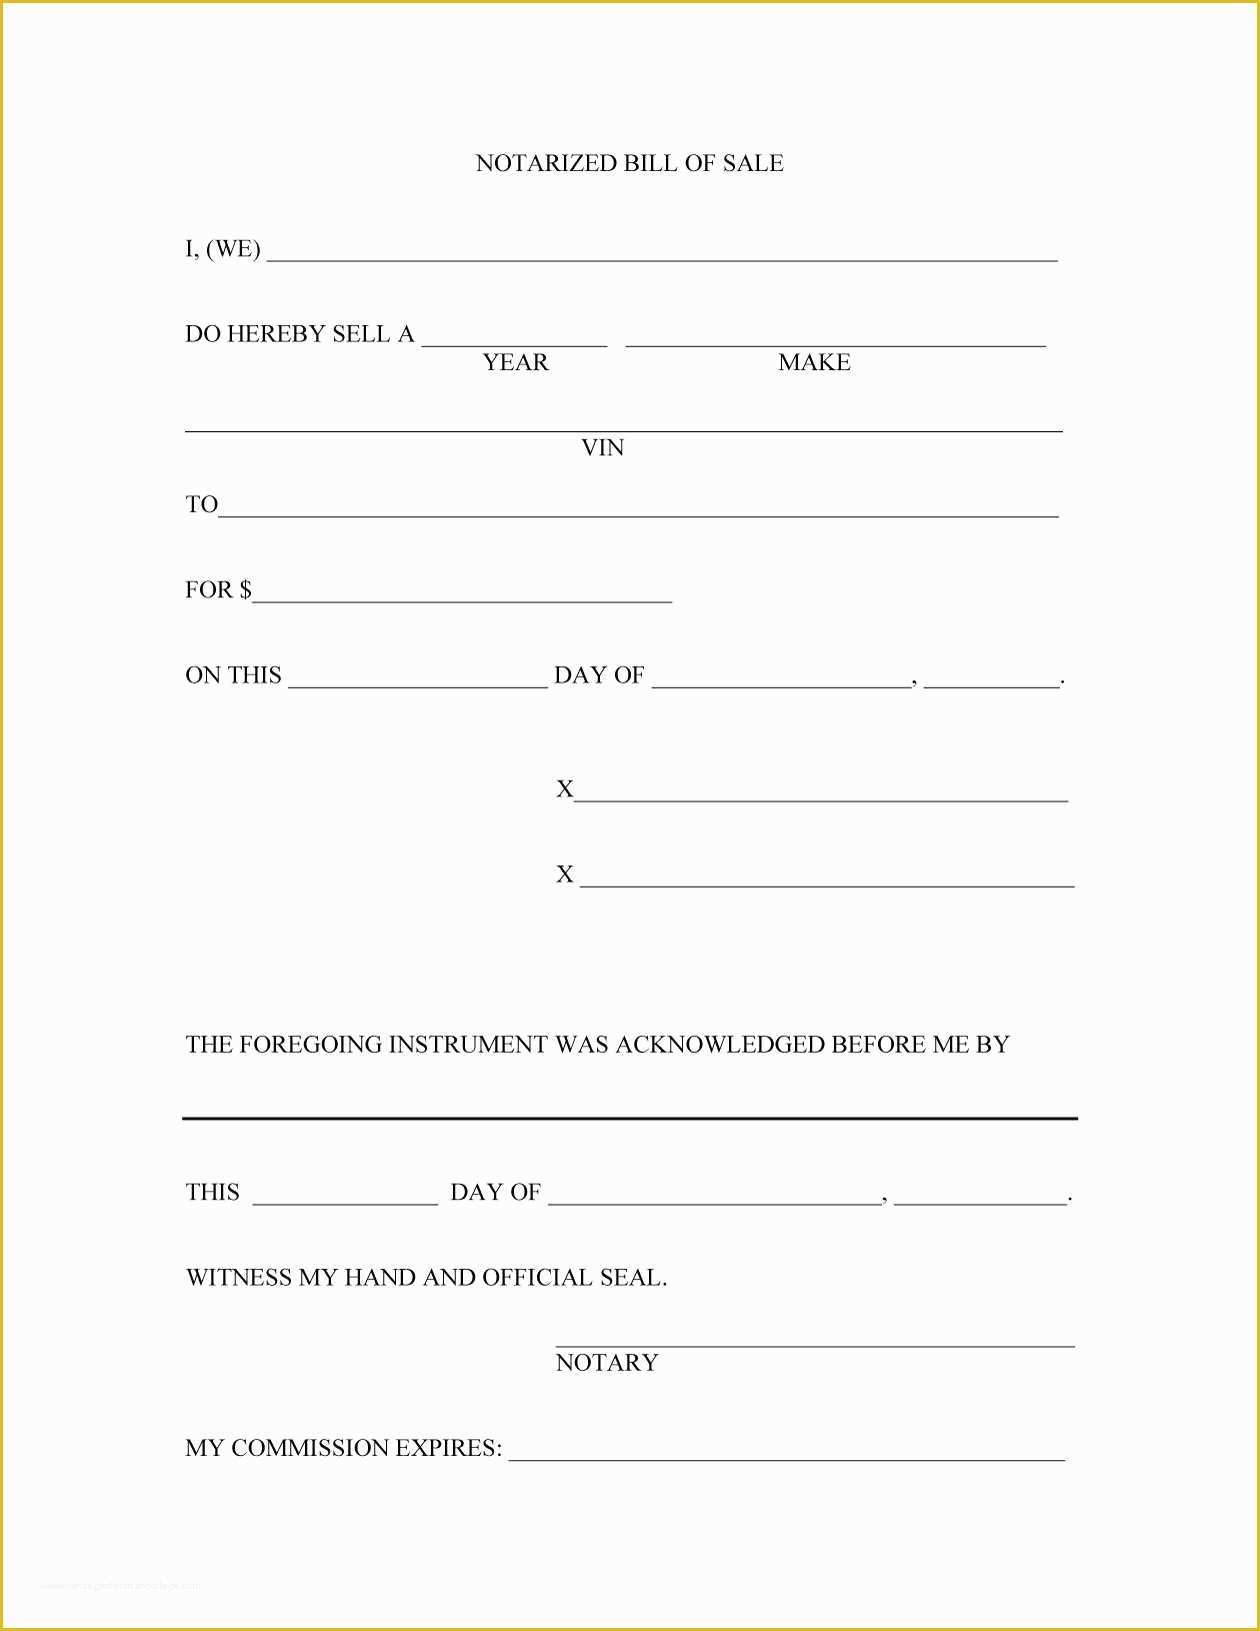 Free Boat Sharing Agreement Template Of 46 Fee Printable Bill Of Sale Templates Car Boat Gun